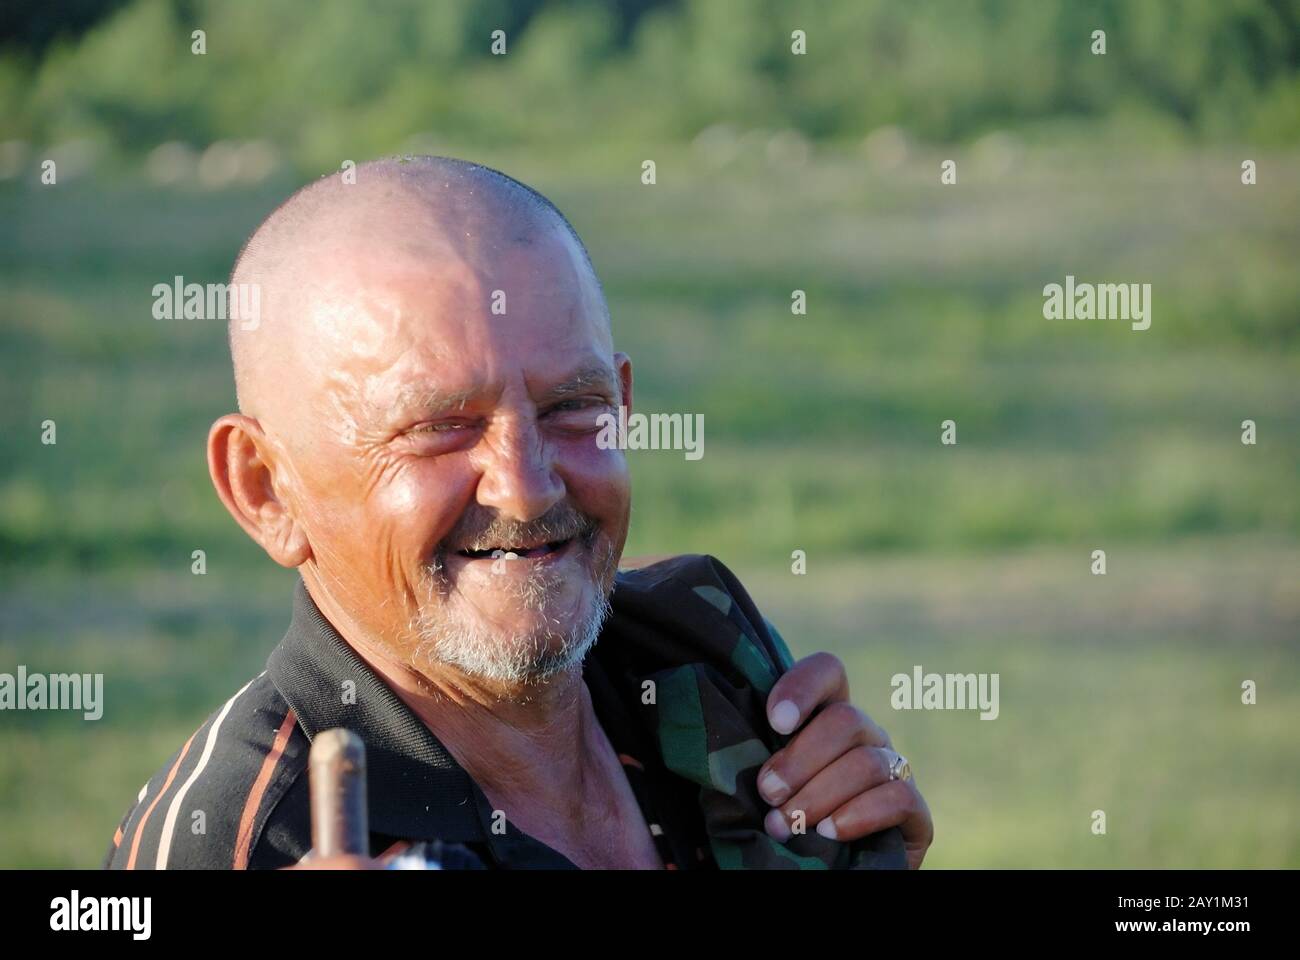 An ugly man with red interesting face Stock Photo